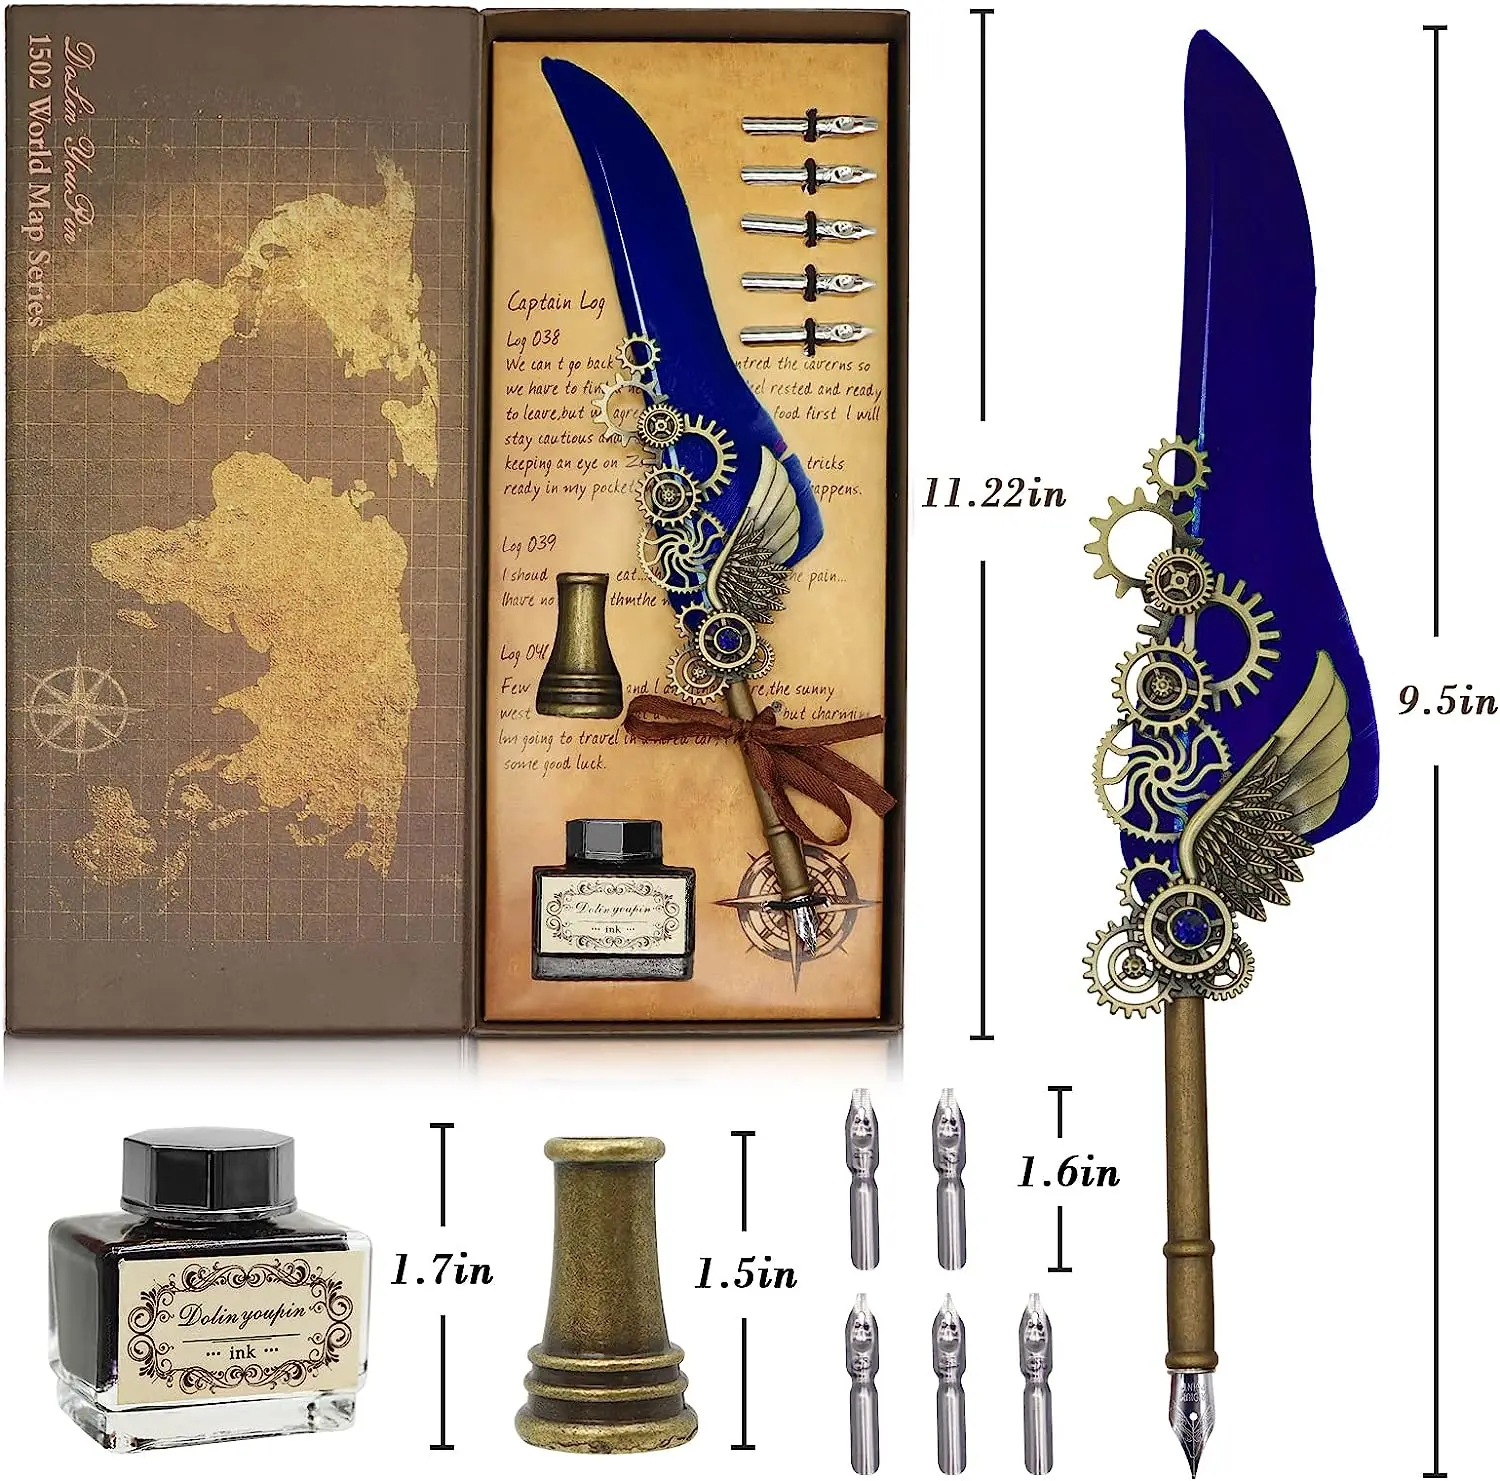 Xinyiart Calligraphy Pen and Ink Set Antique Writing Quill Ink Dip Feather Pens With Replacement Pen Tips